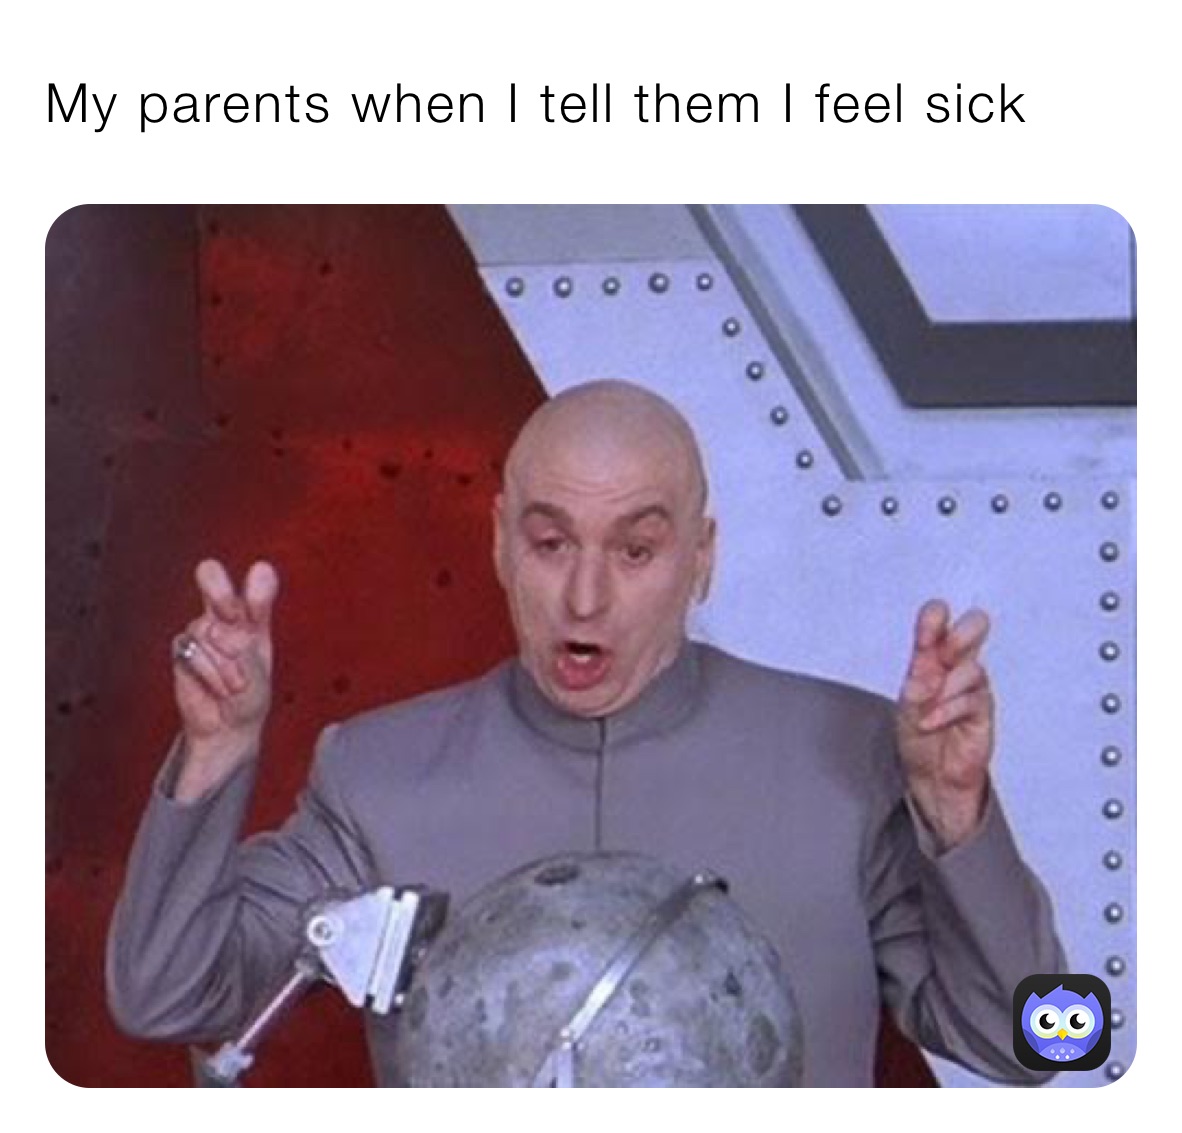 My parents when I tell them I feel sick